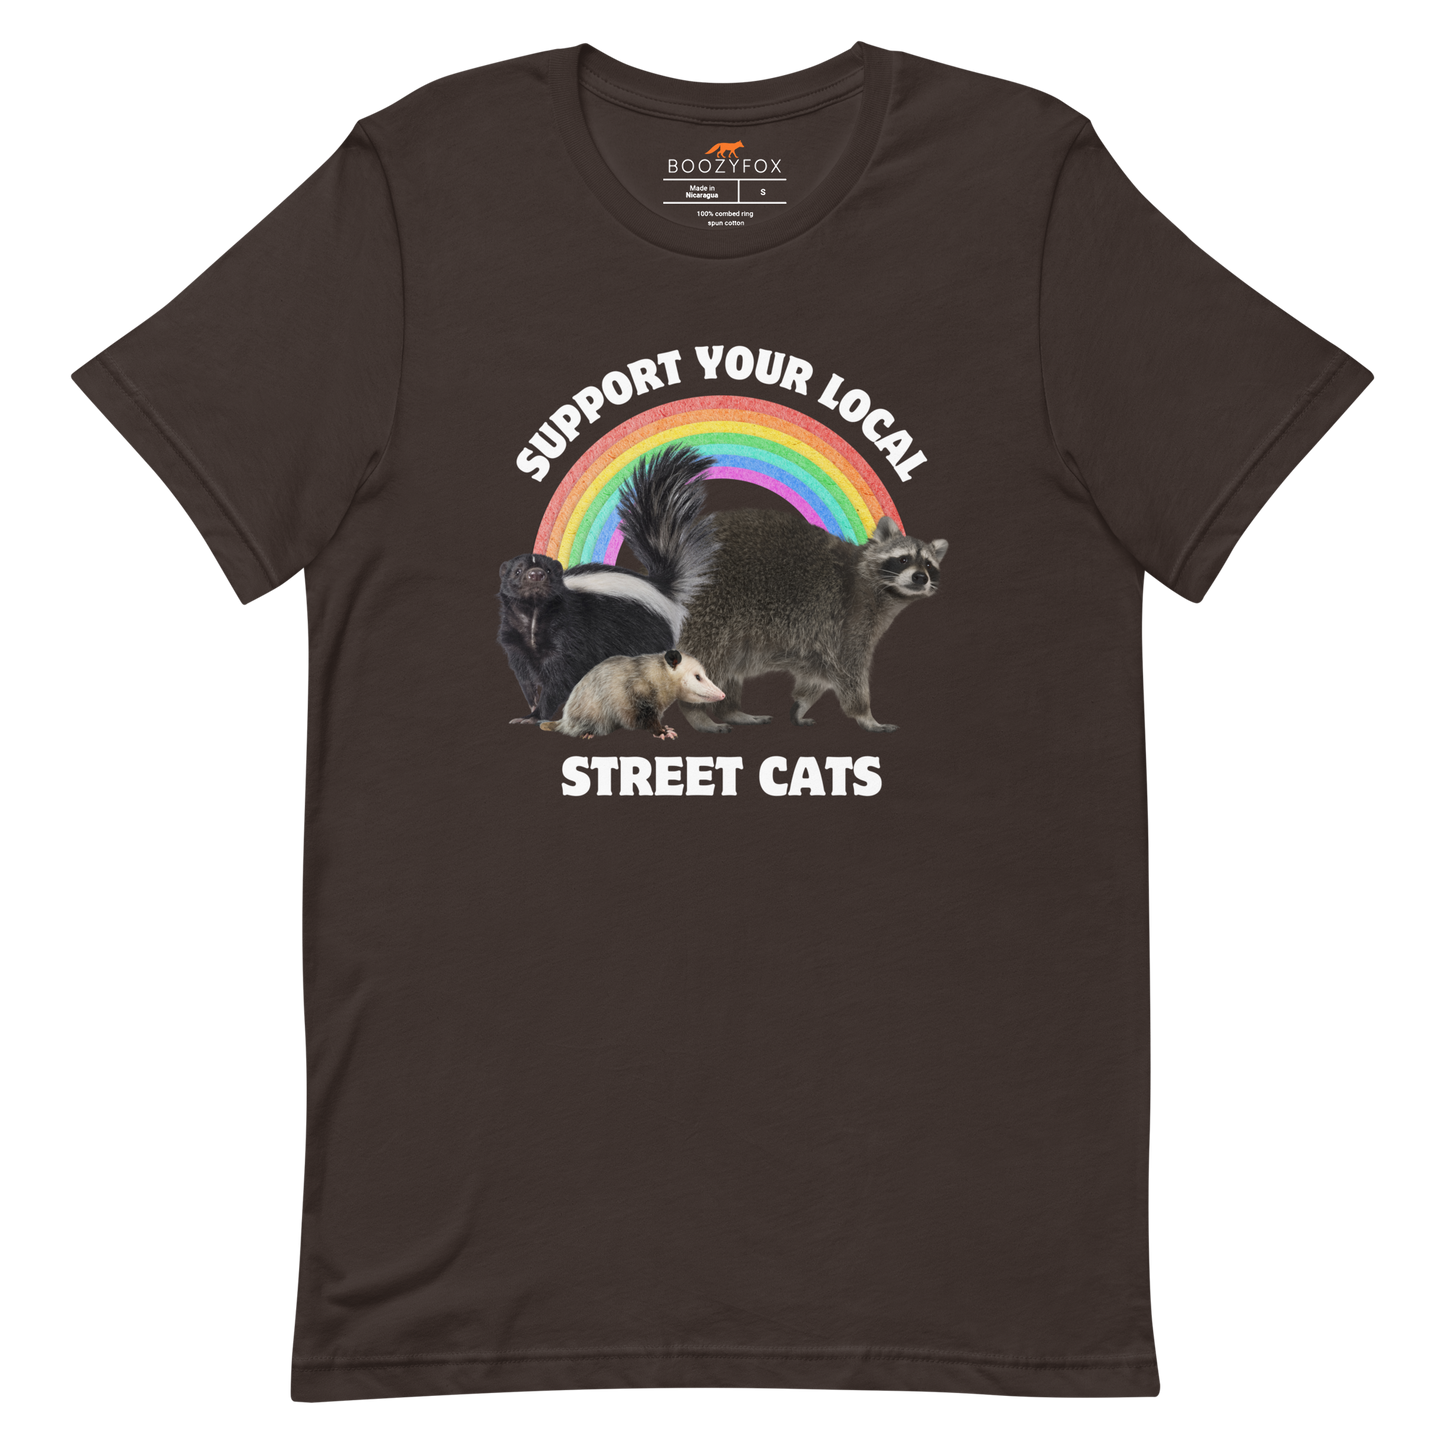 Brown Premium Street Cats Tee featuring a funny 'Support Your Local Street Cats' graphic on the chest - Funny Graphic Animal Tees - Boozy Fox